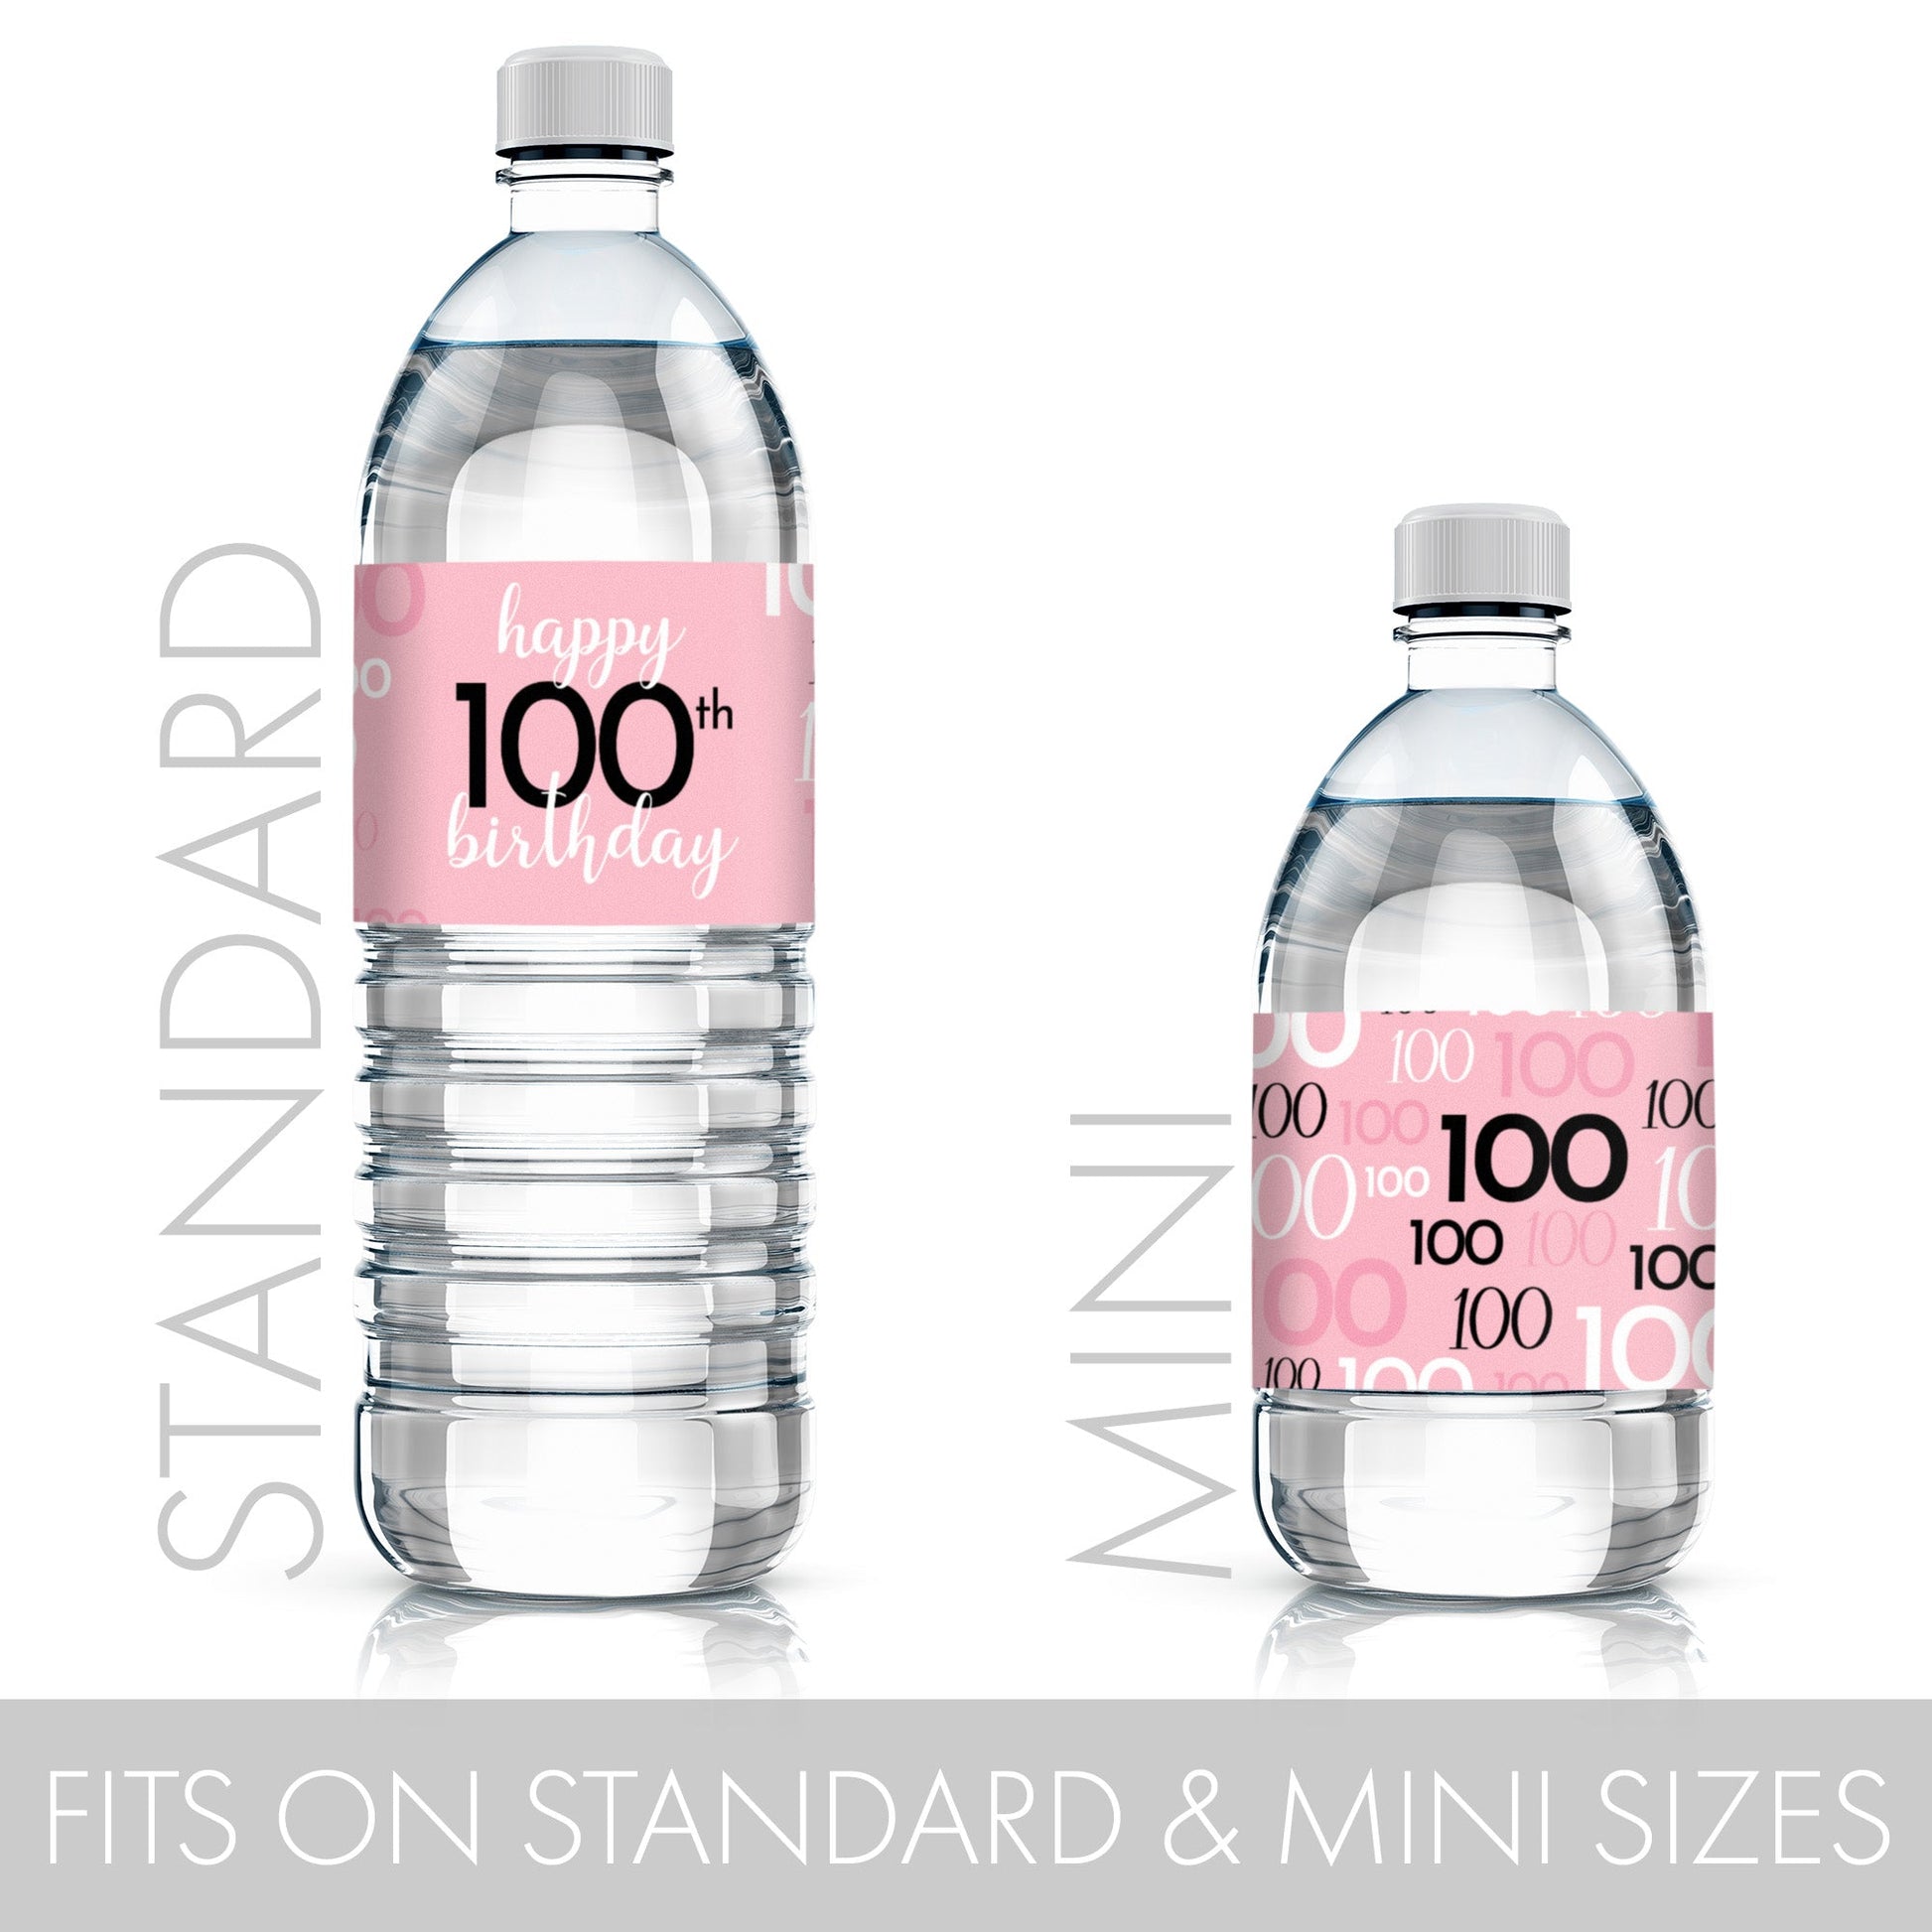 Celebrate in style with pink and black water bottle labels for your 100th birthday